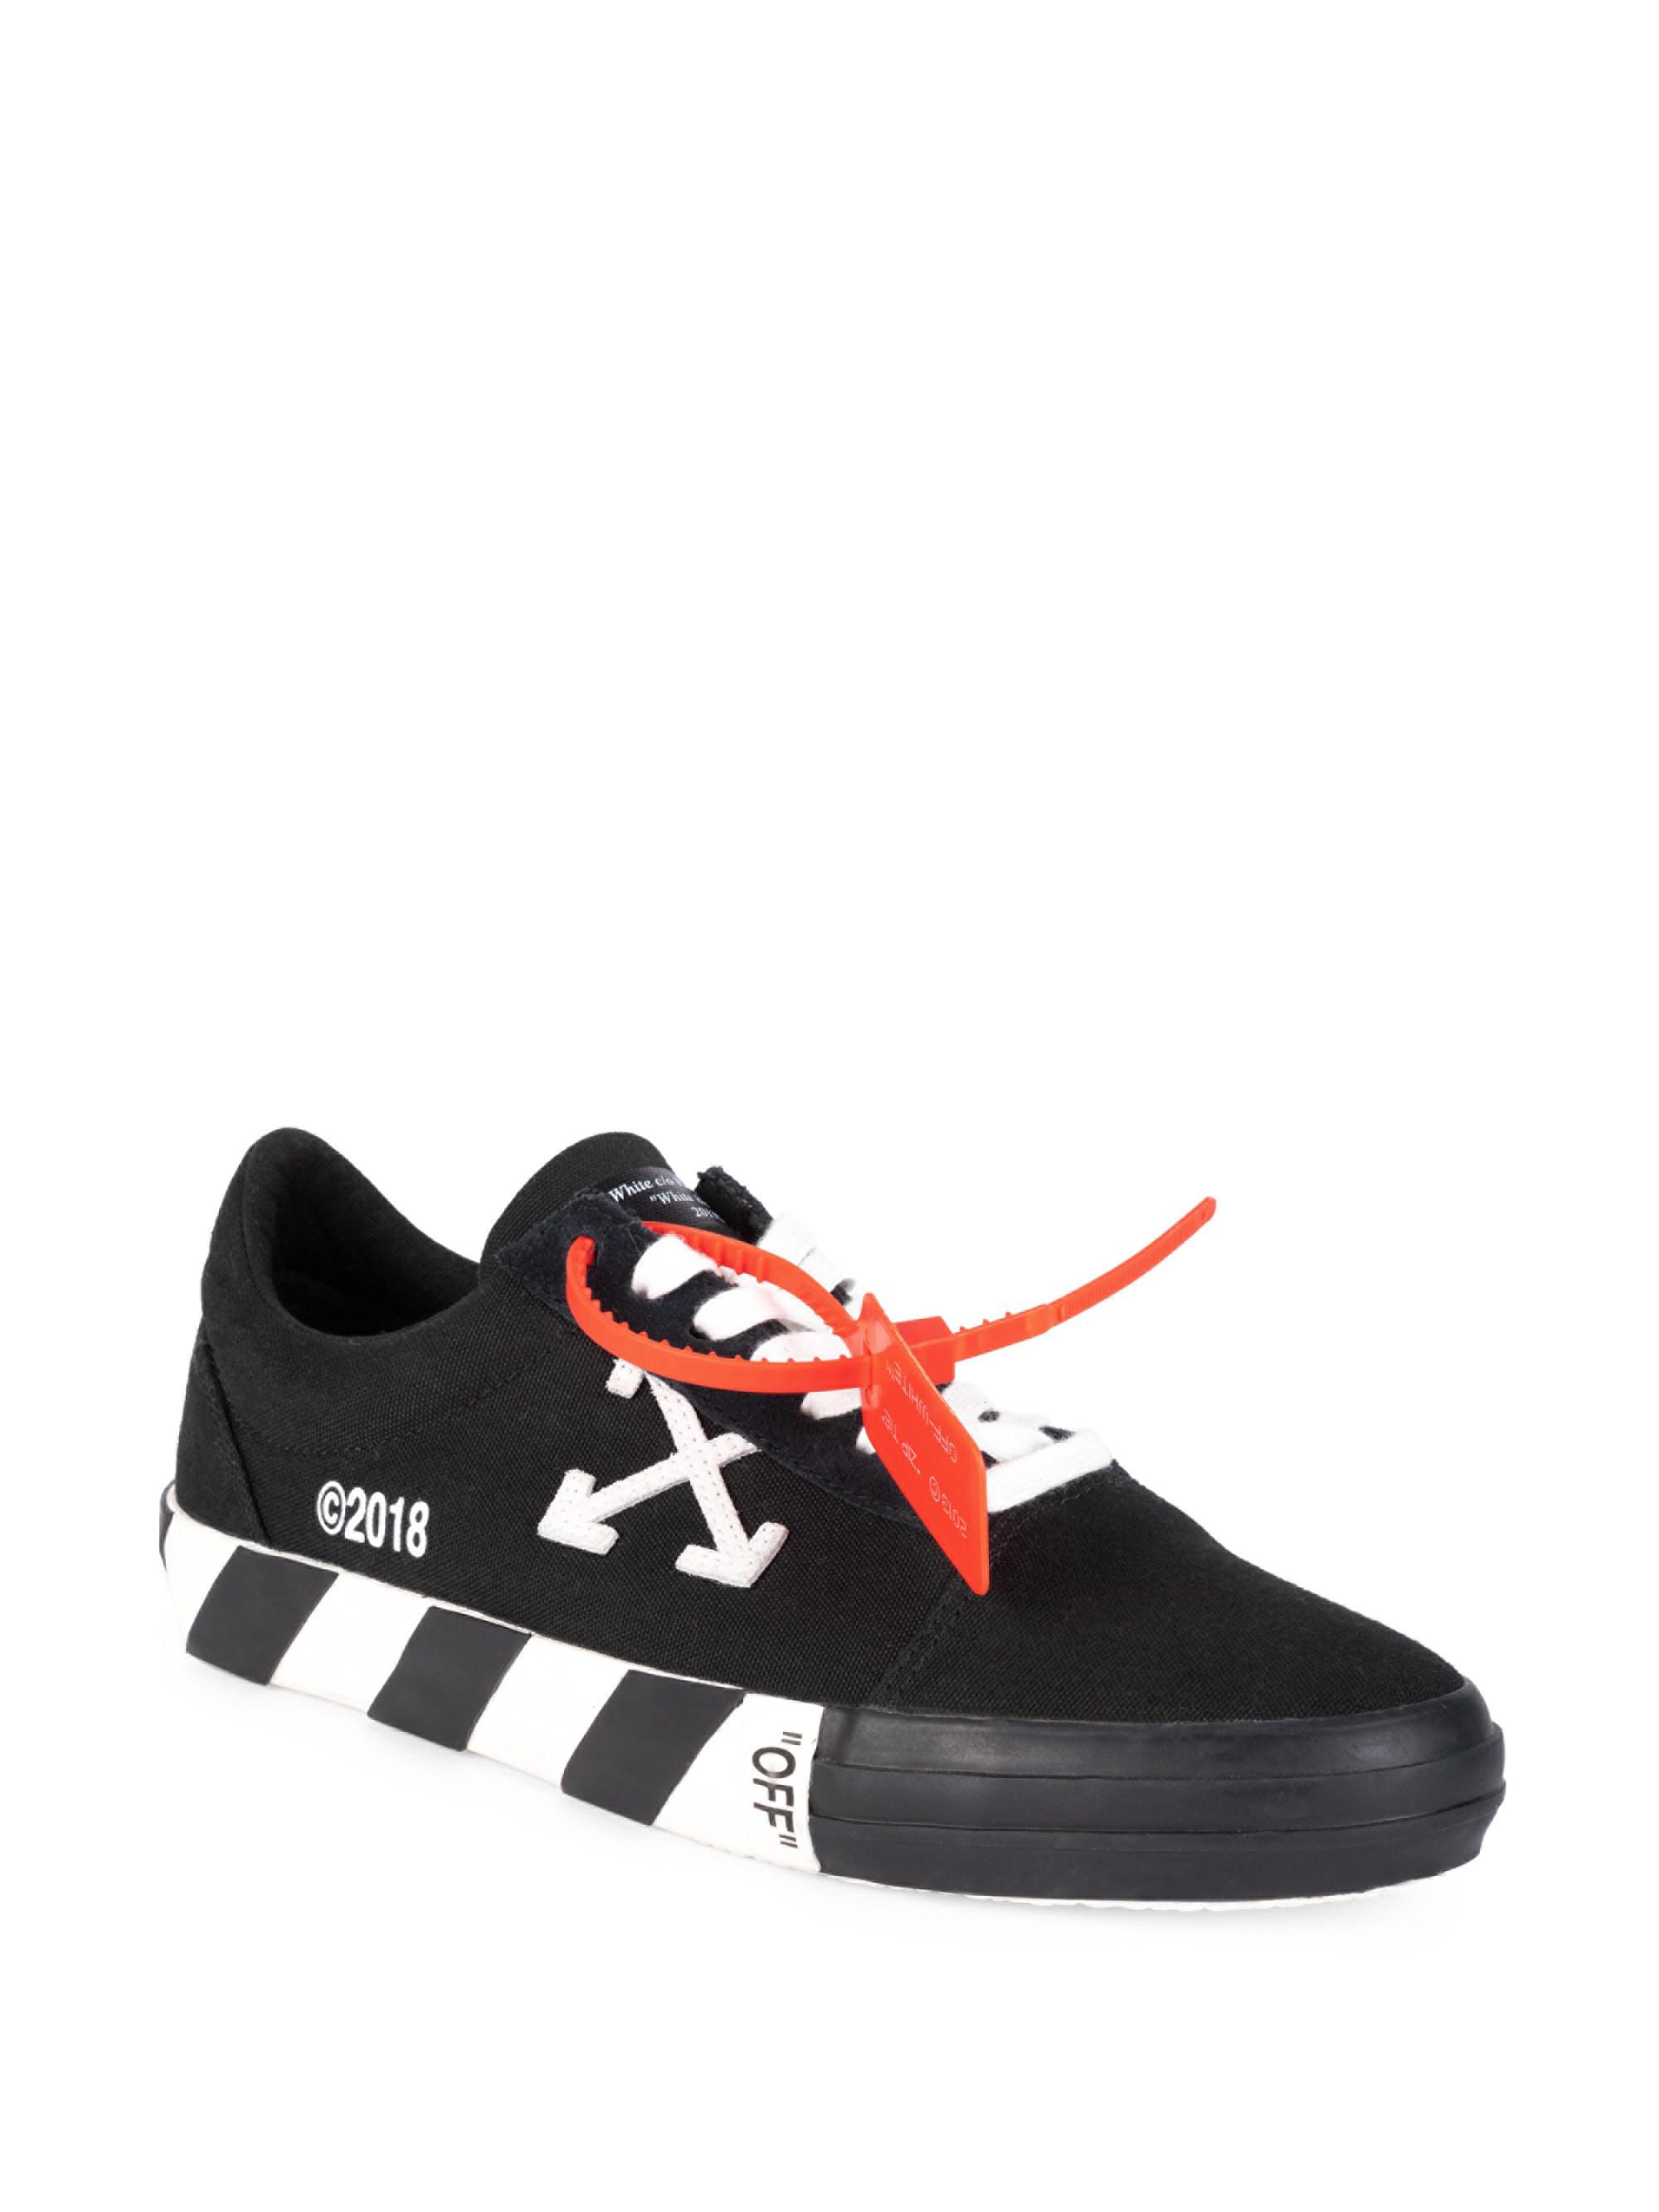 Off-White c/o Virgil Abloh Vulcanized Striped Low-top Sneakers in Black ...